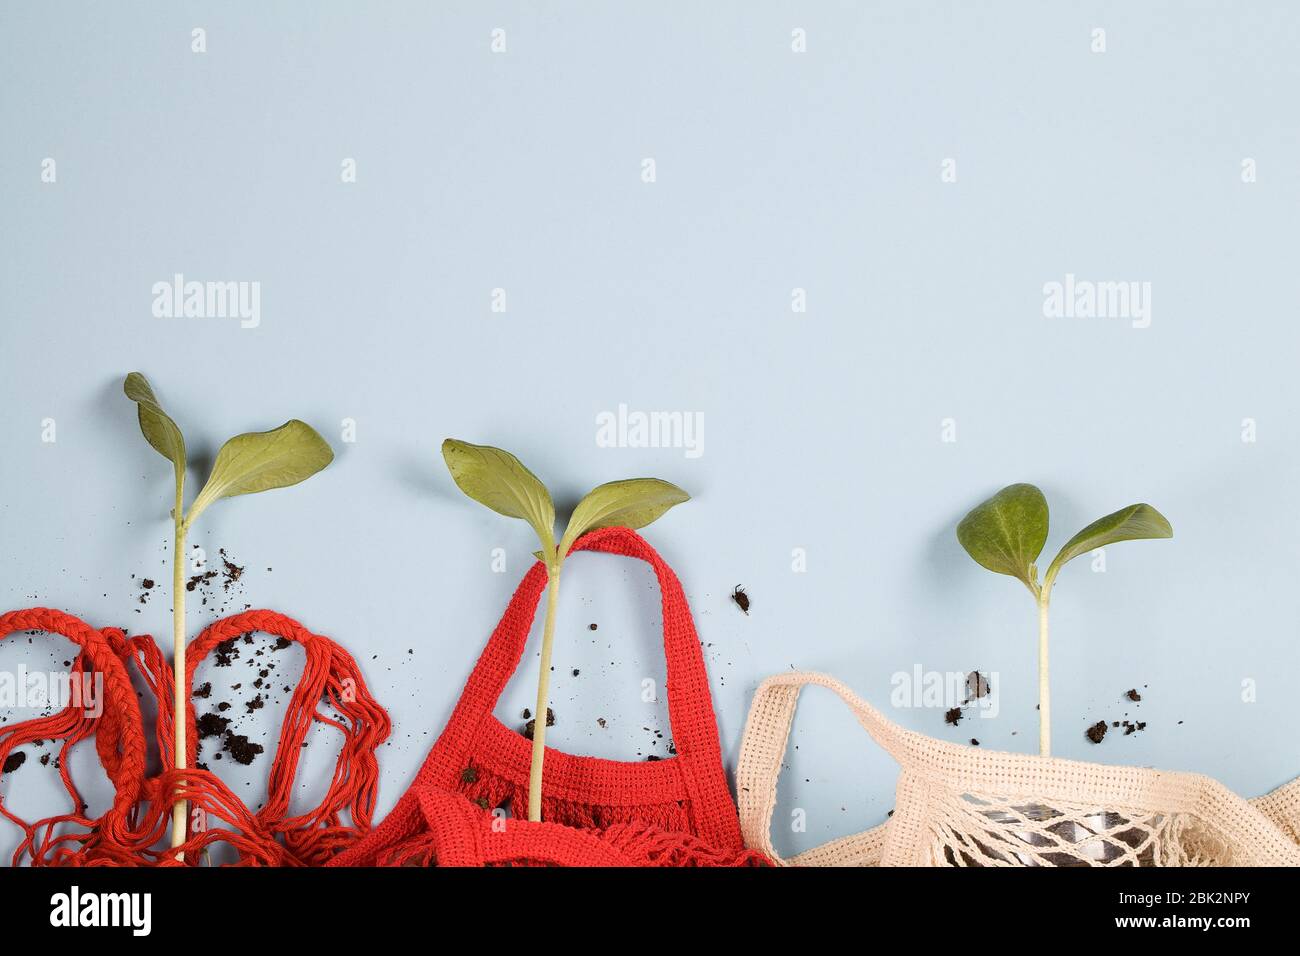 strong young plants in red and white mesh shopping bags on blue background. flat lay top view, copy space banner. eco friendly concept Stock Photo